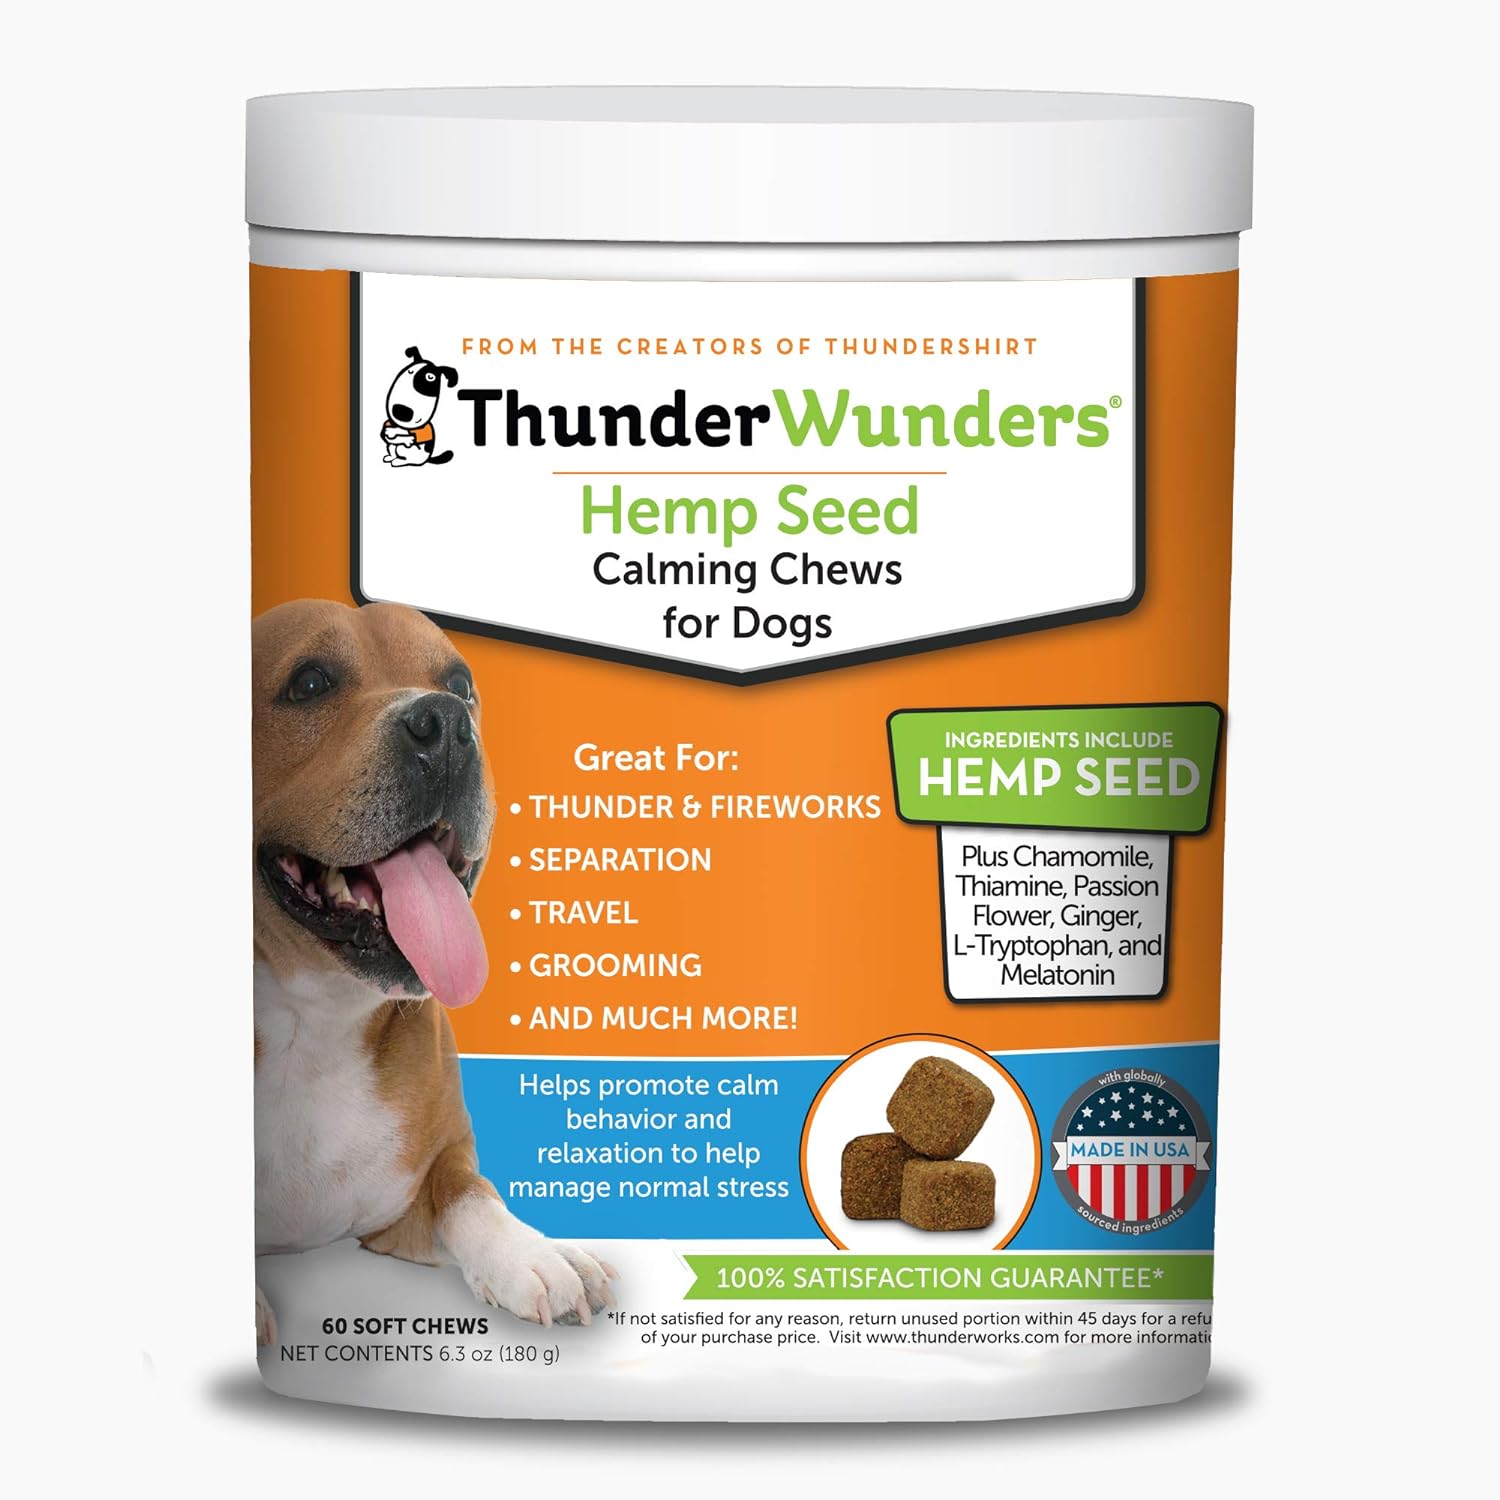 ThunderWunders Hemp Dog Calming Chews | Vet Recommended for Situational Anxiety | Fireworks, Thunderstorms, Travel & More | Made with Hemp Seed, Thiamine, L-Tryptophan, Melatonin & Ginger (60 Count)